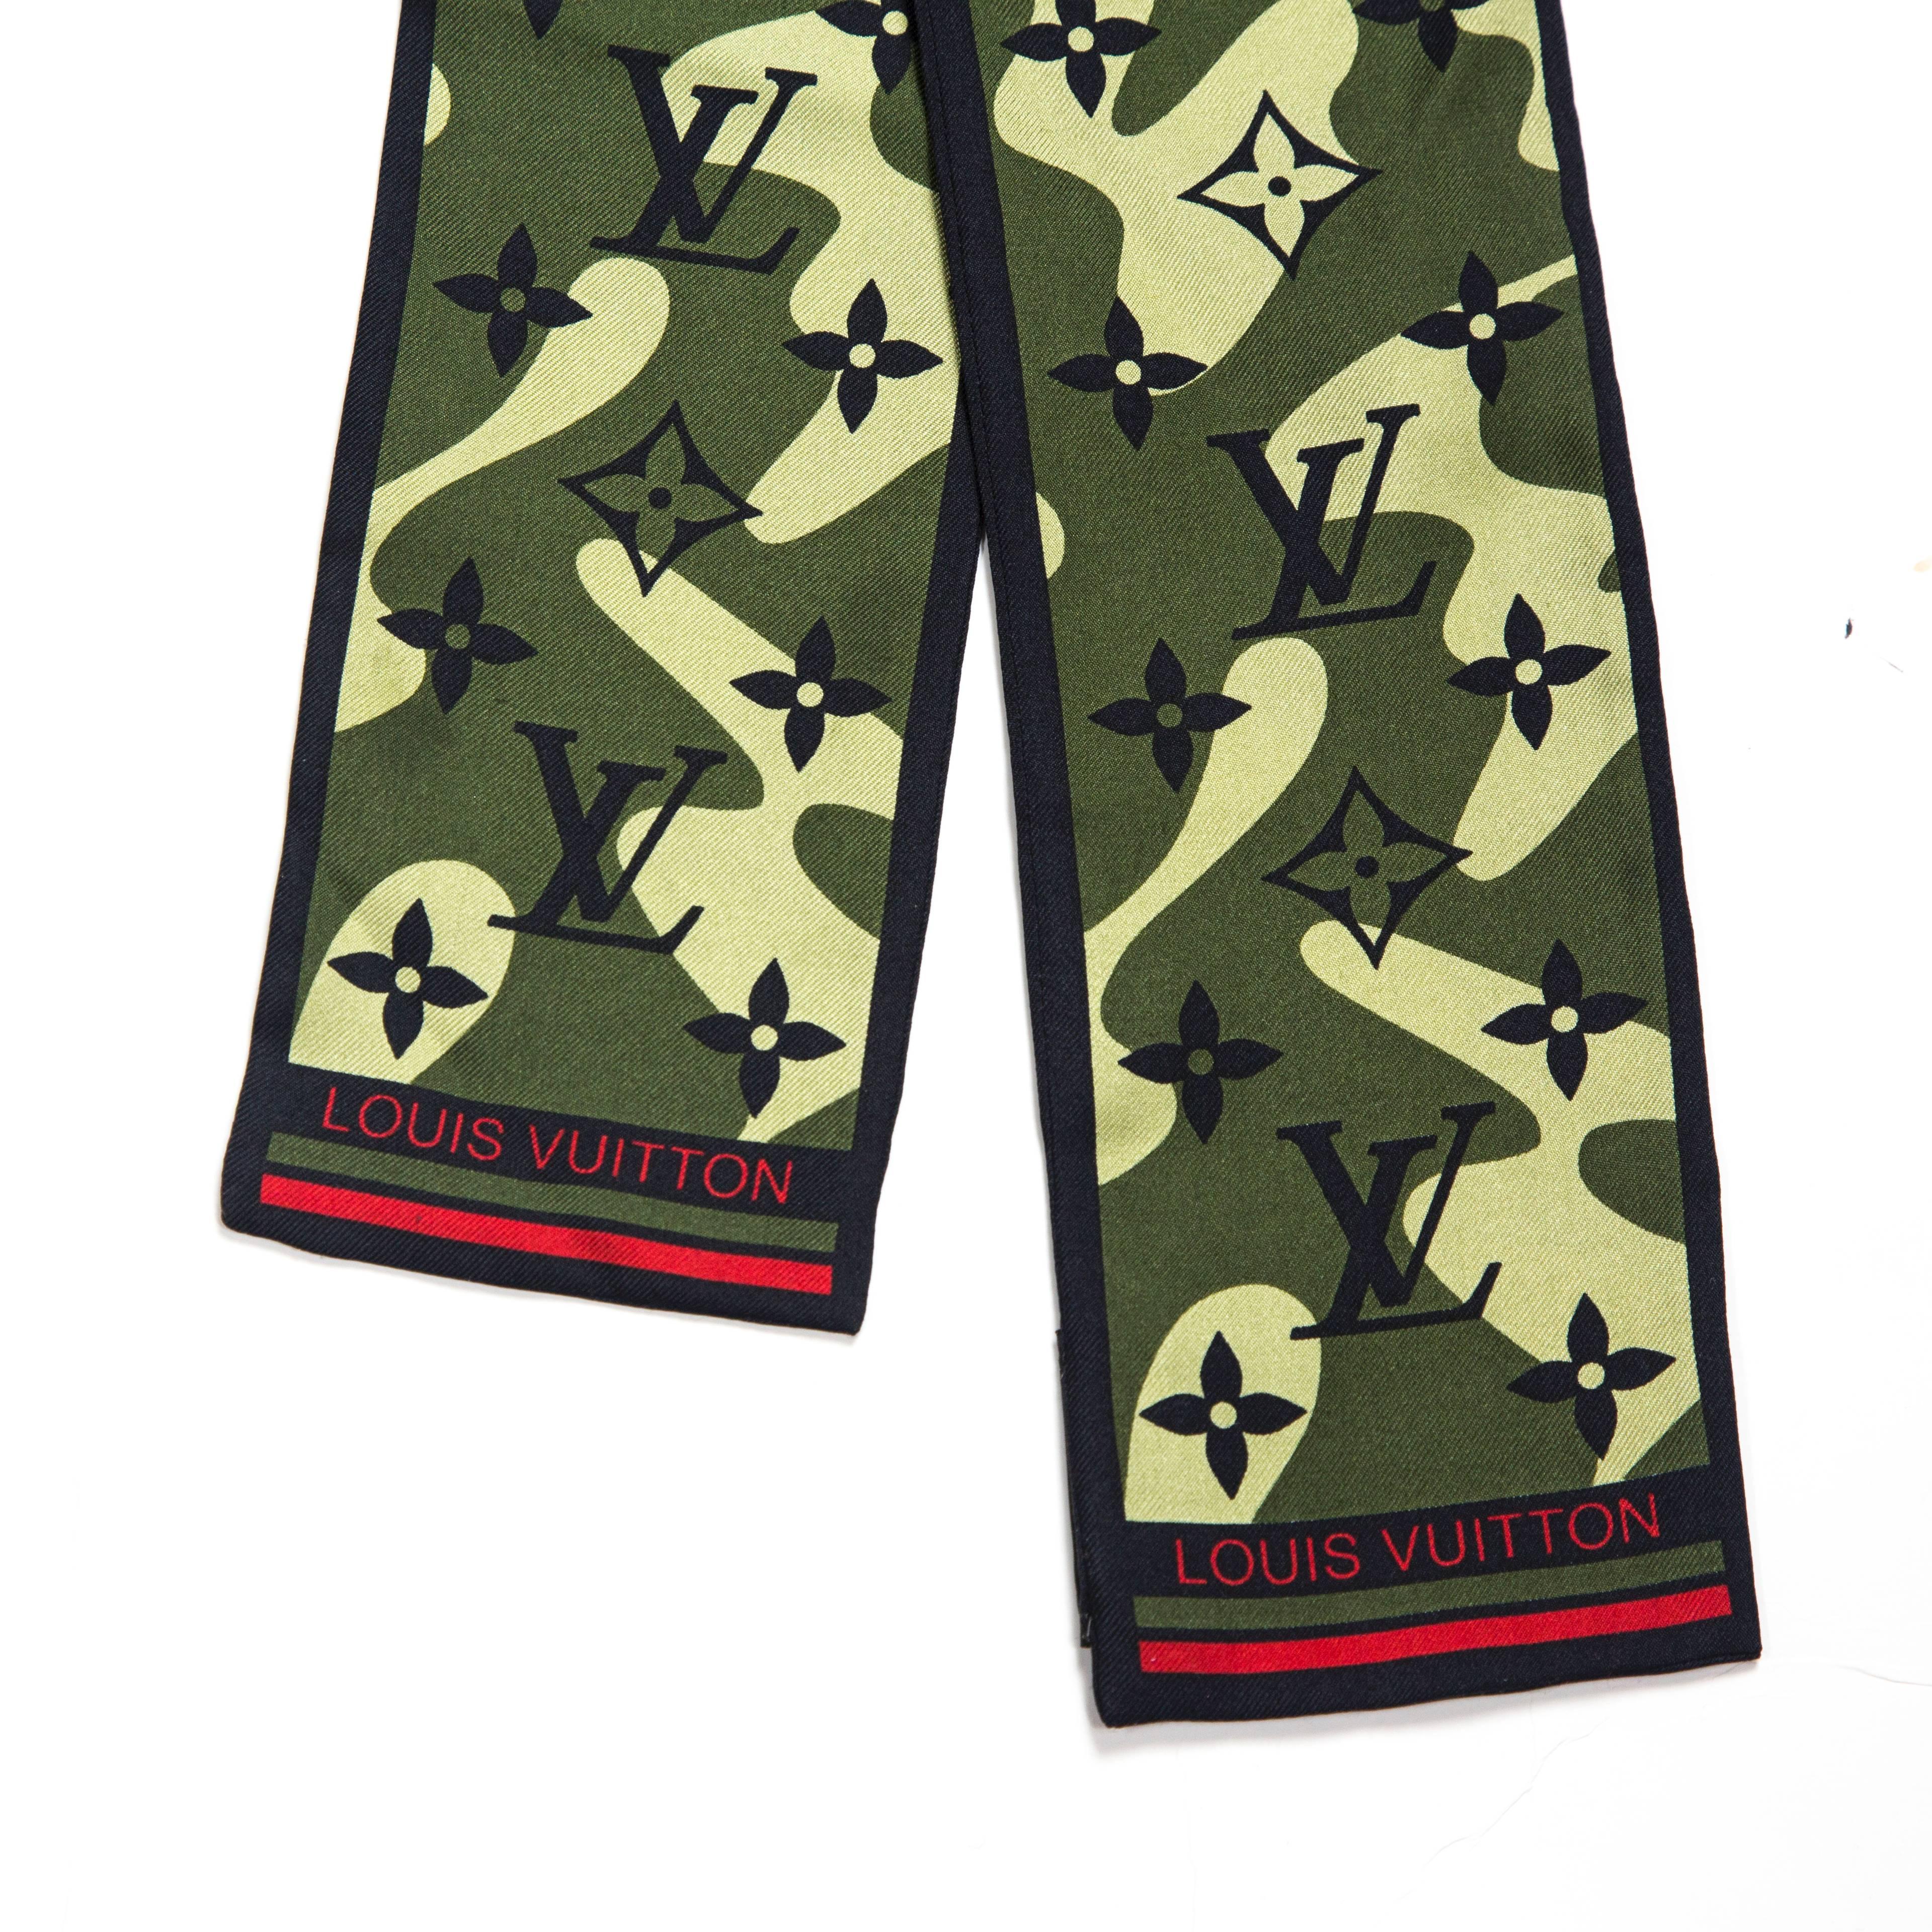 Louis Vuitton - Men's Camo Scarf

Color: Green

Material: Silk

------------------------------------------------------------

Details:

- camouflage pattern throughout

- monogram pattern throughout

- includes box

- item #